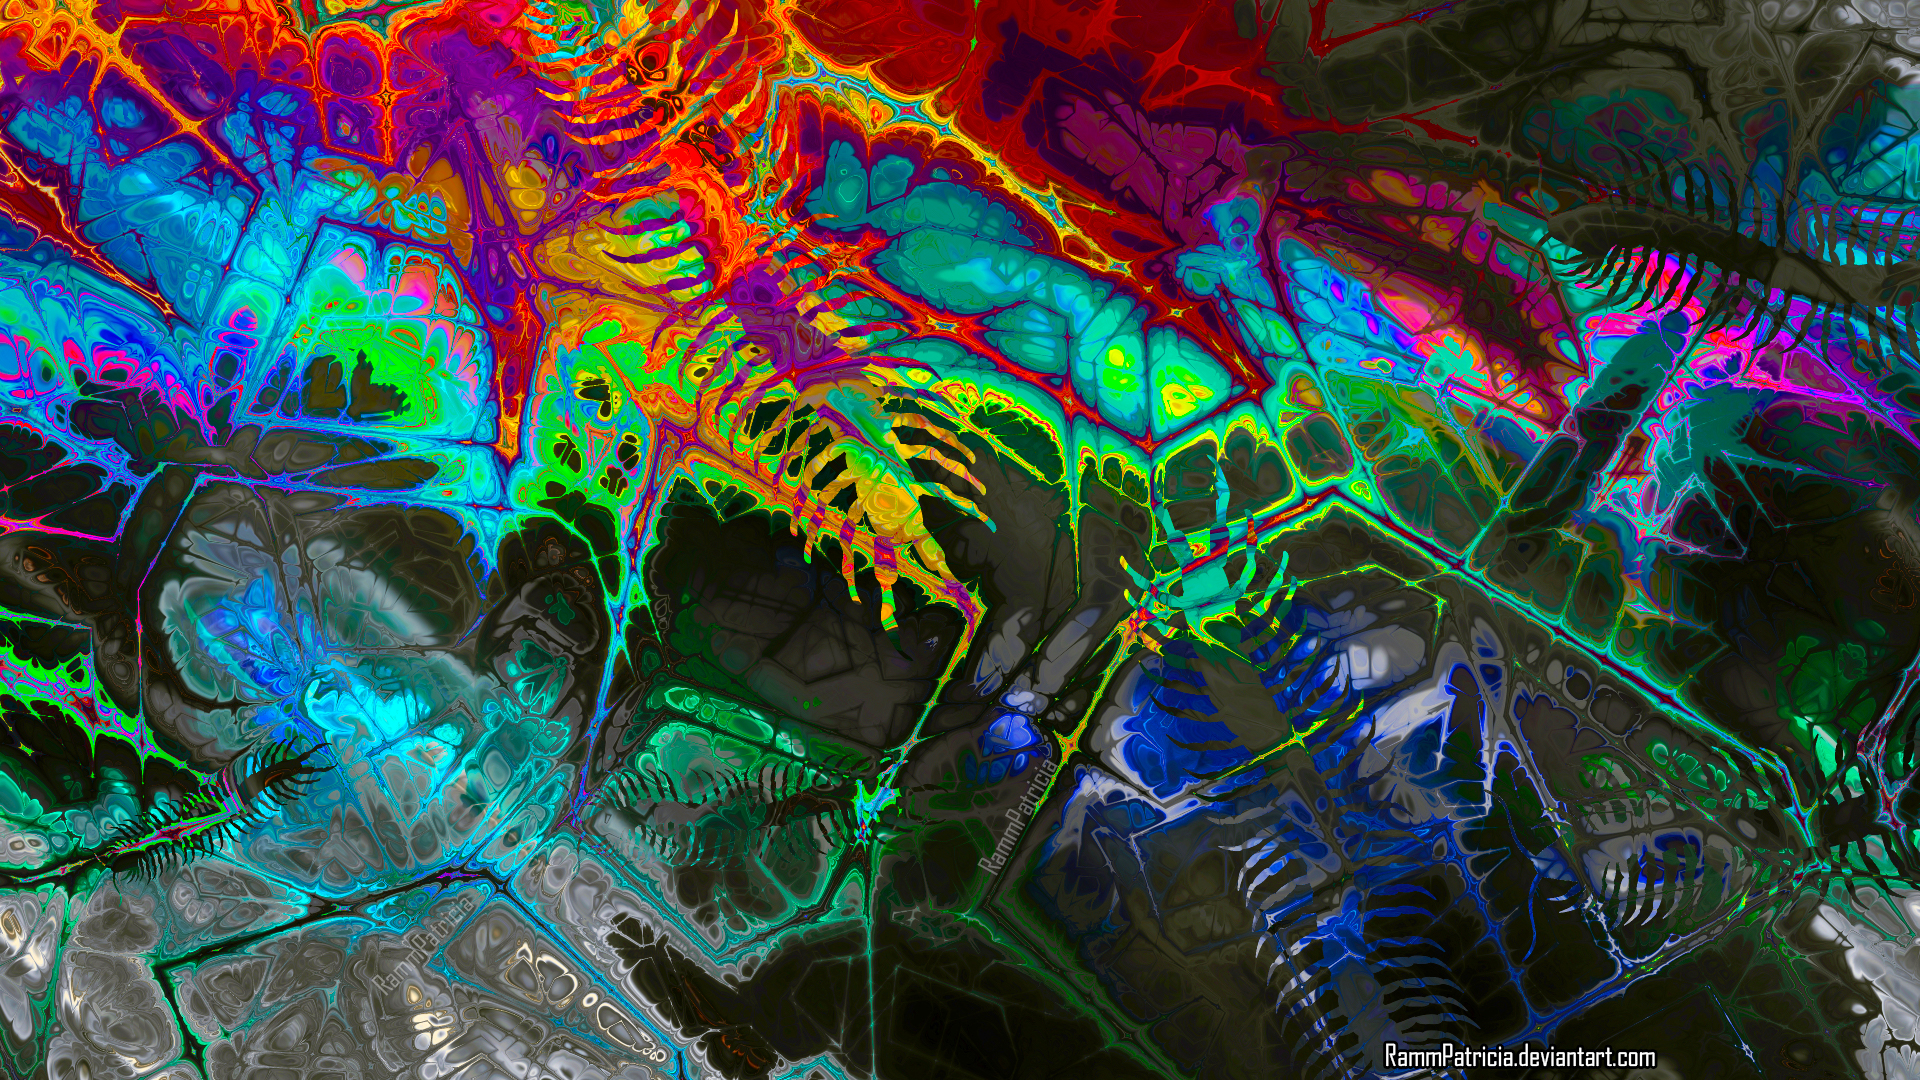 RammPatricia Digital Digital Art Abstract Colorful Centipede Iridescent Watermarked Trippy Psychedel 1920x1080